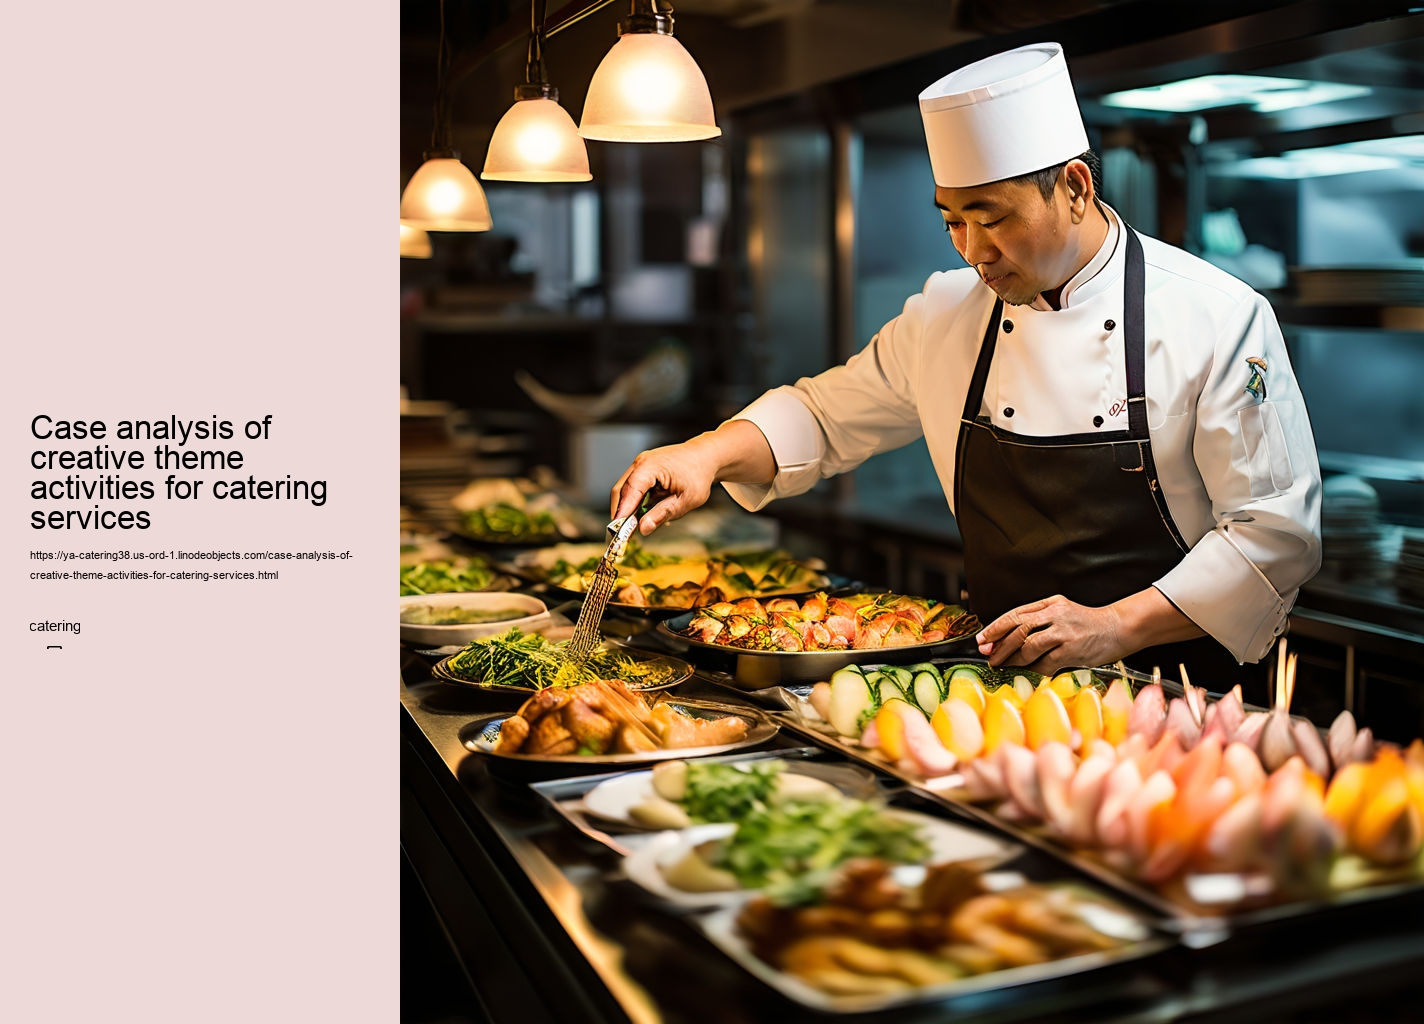 Case analysis of creative theme activities for catering services